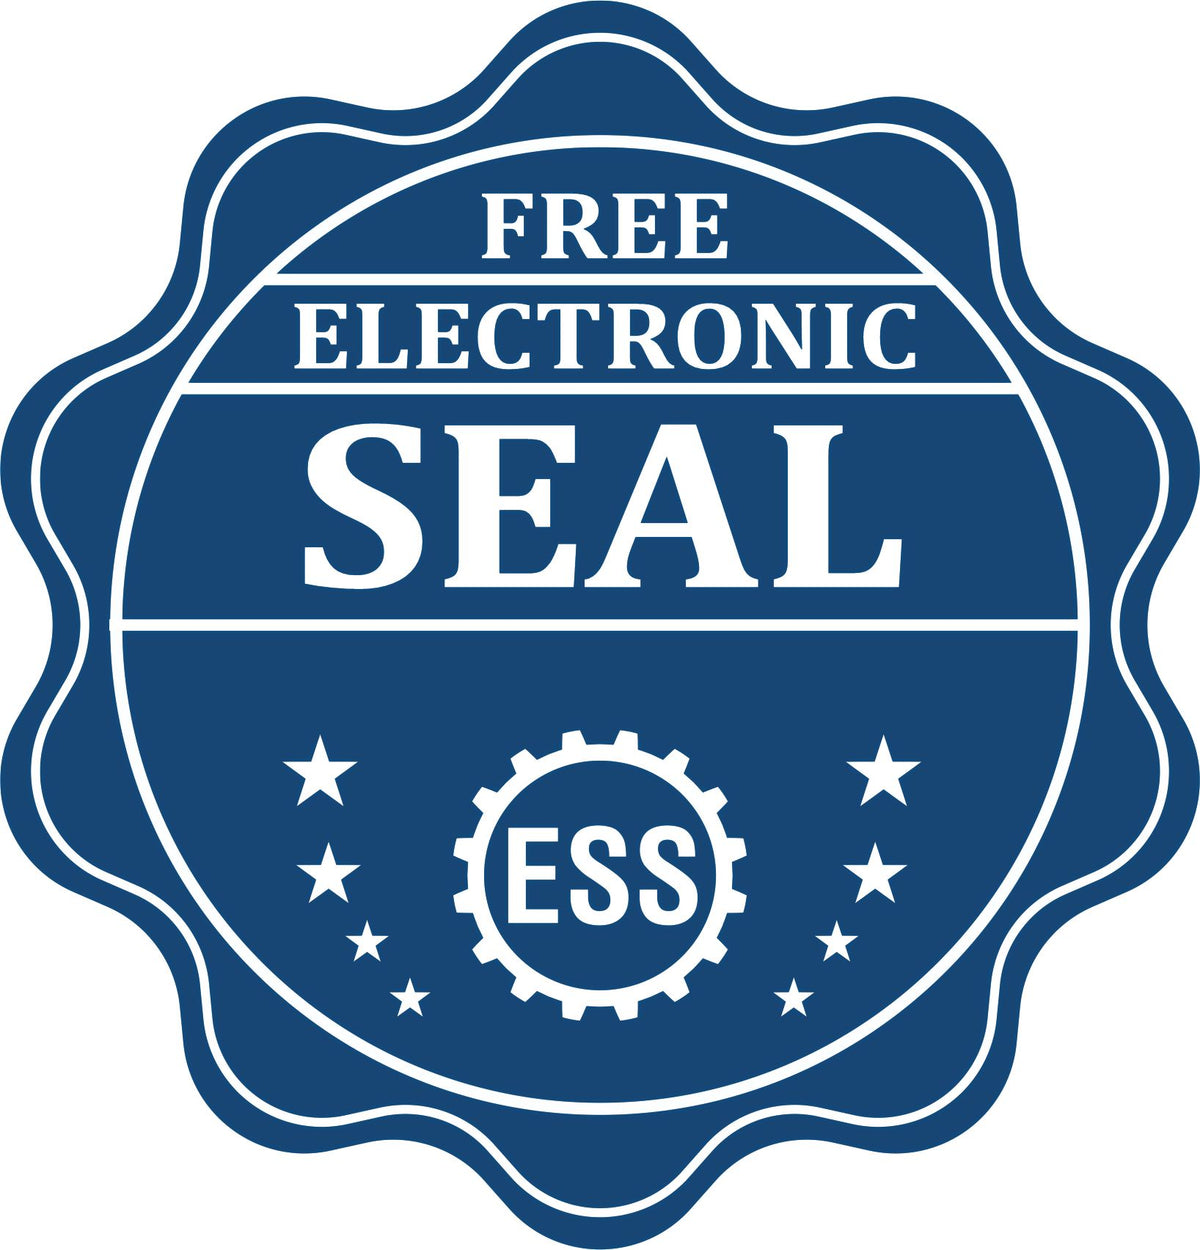 A badge showing a free electronic seal for the Hawaii Desk Surveyor Seal Embosser with stars and the ESS gear on the emblem.